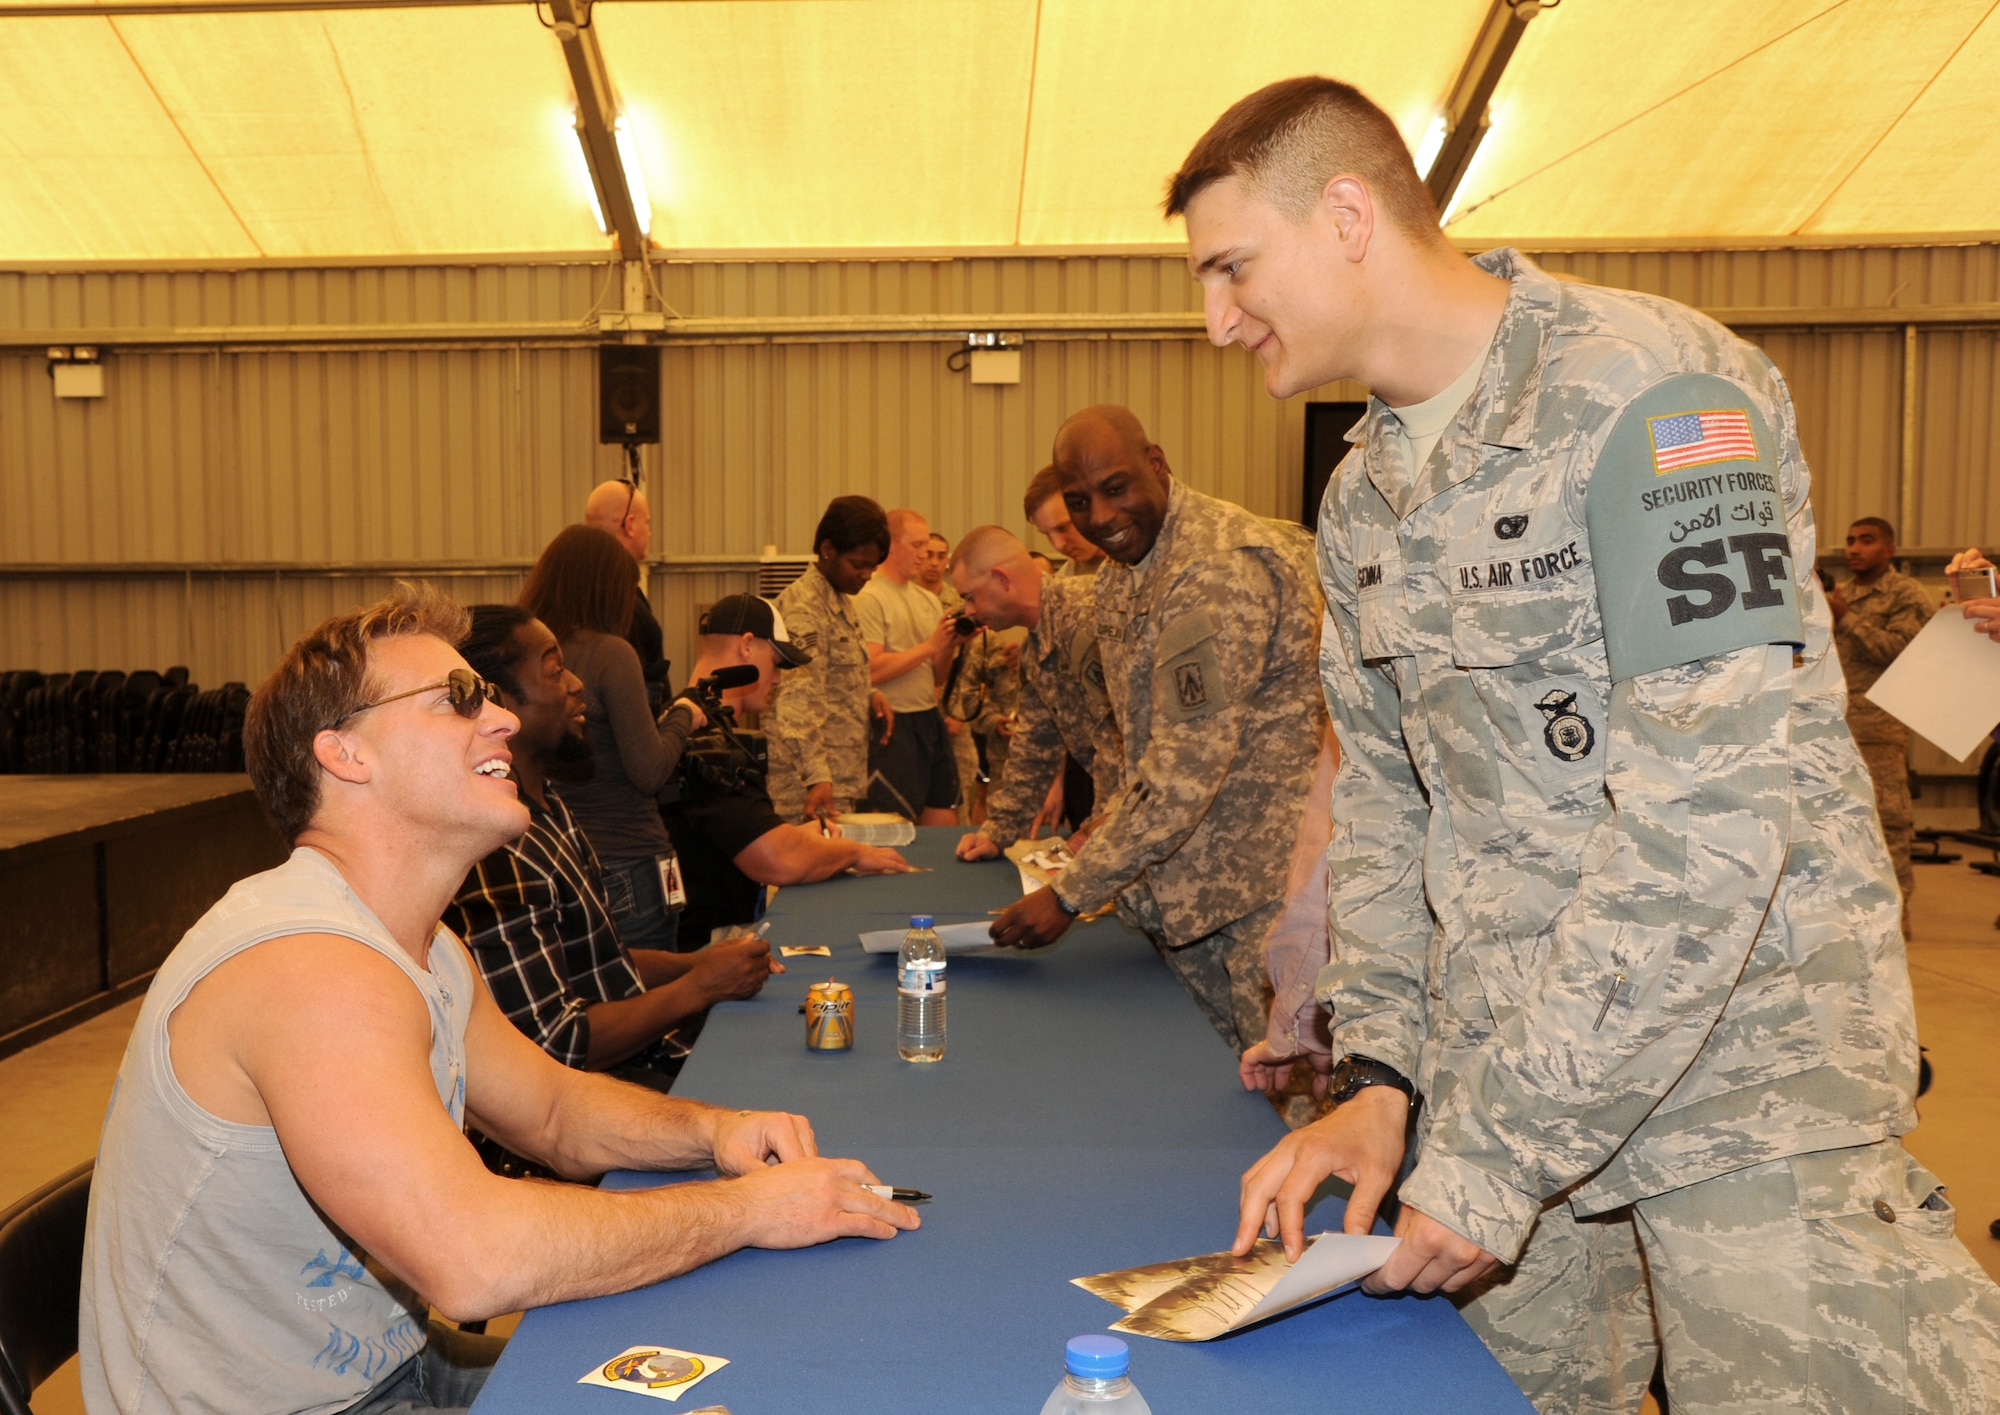 SOUTHWEST ASIA - Airman 1st Class Jacob Senna gets an autograph from World Wrestling Entertainment superstar Chris Jericho during a USO visit Feb. 10, 2012. The wrestlers took photos and signed autographs with more than 200 Airmen and Soldiers assigned to the 380th Air Expeditionary Wing. (U.S. Air Force photo/Tech. Sgt. Arian Nead)